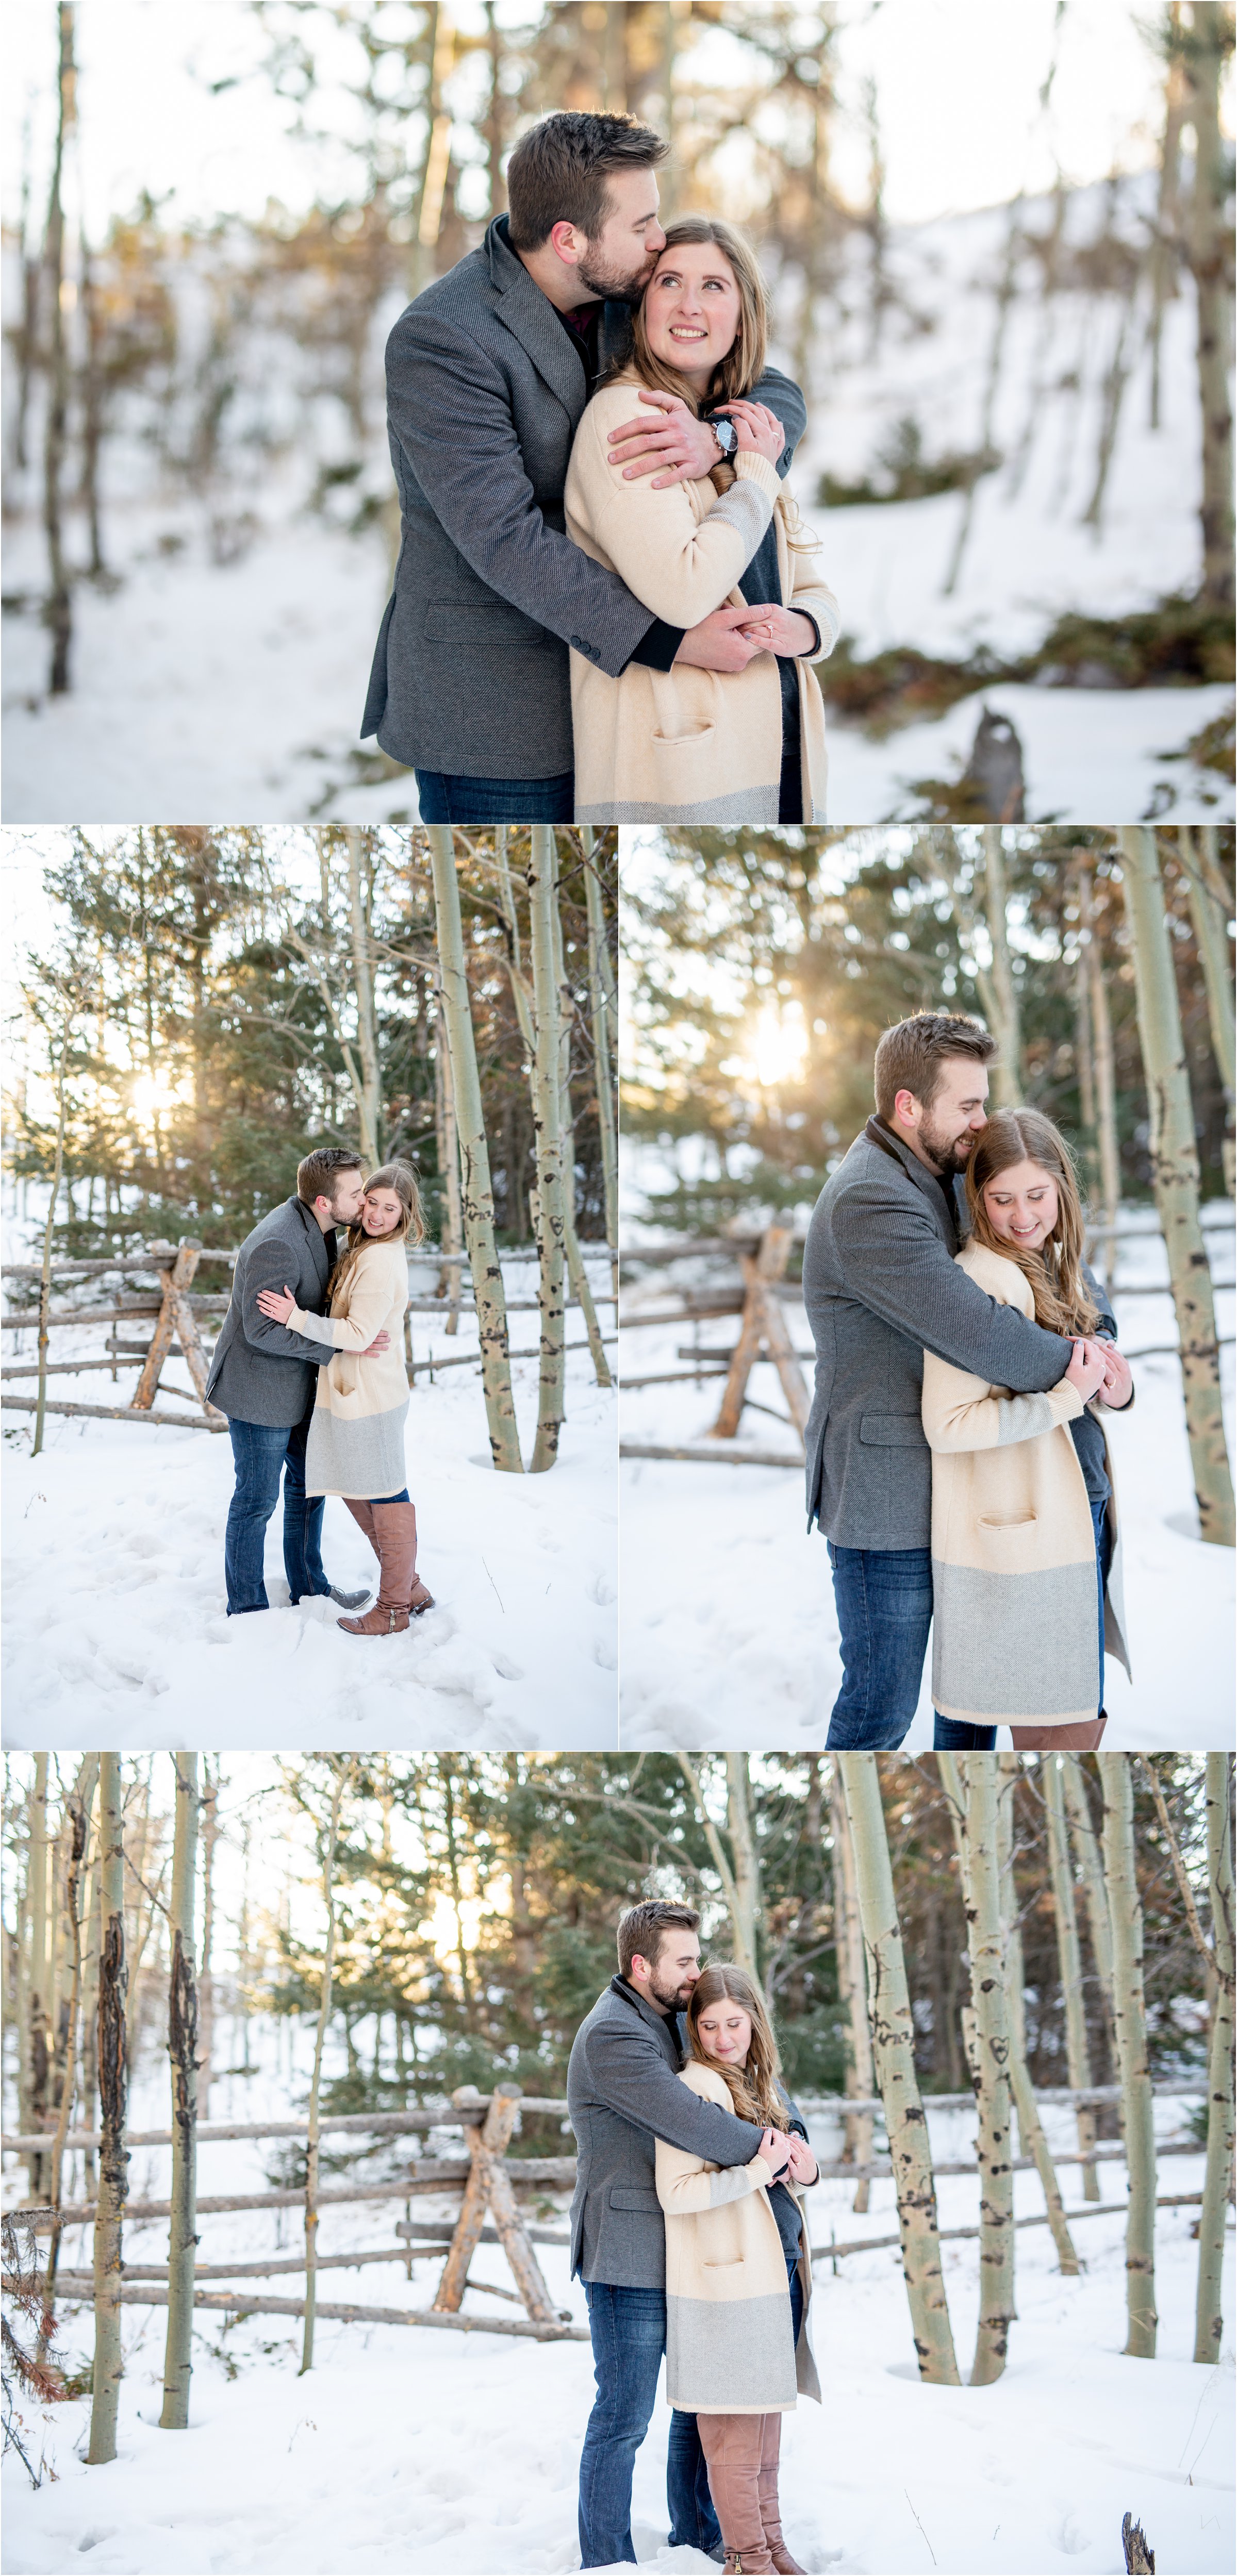 engaged couple snuggling and kissing in an aspen grove with snow on the ground